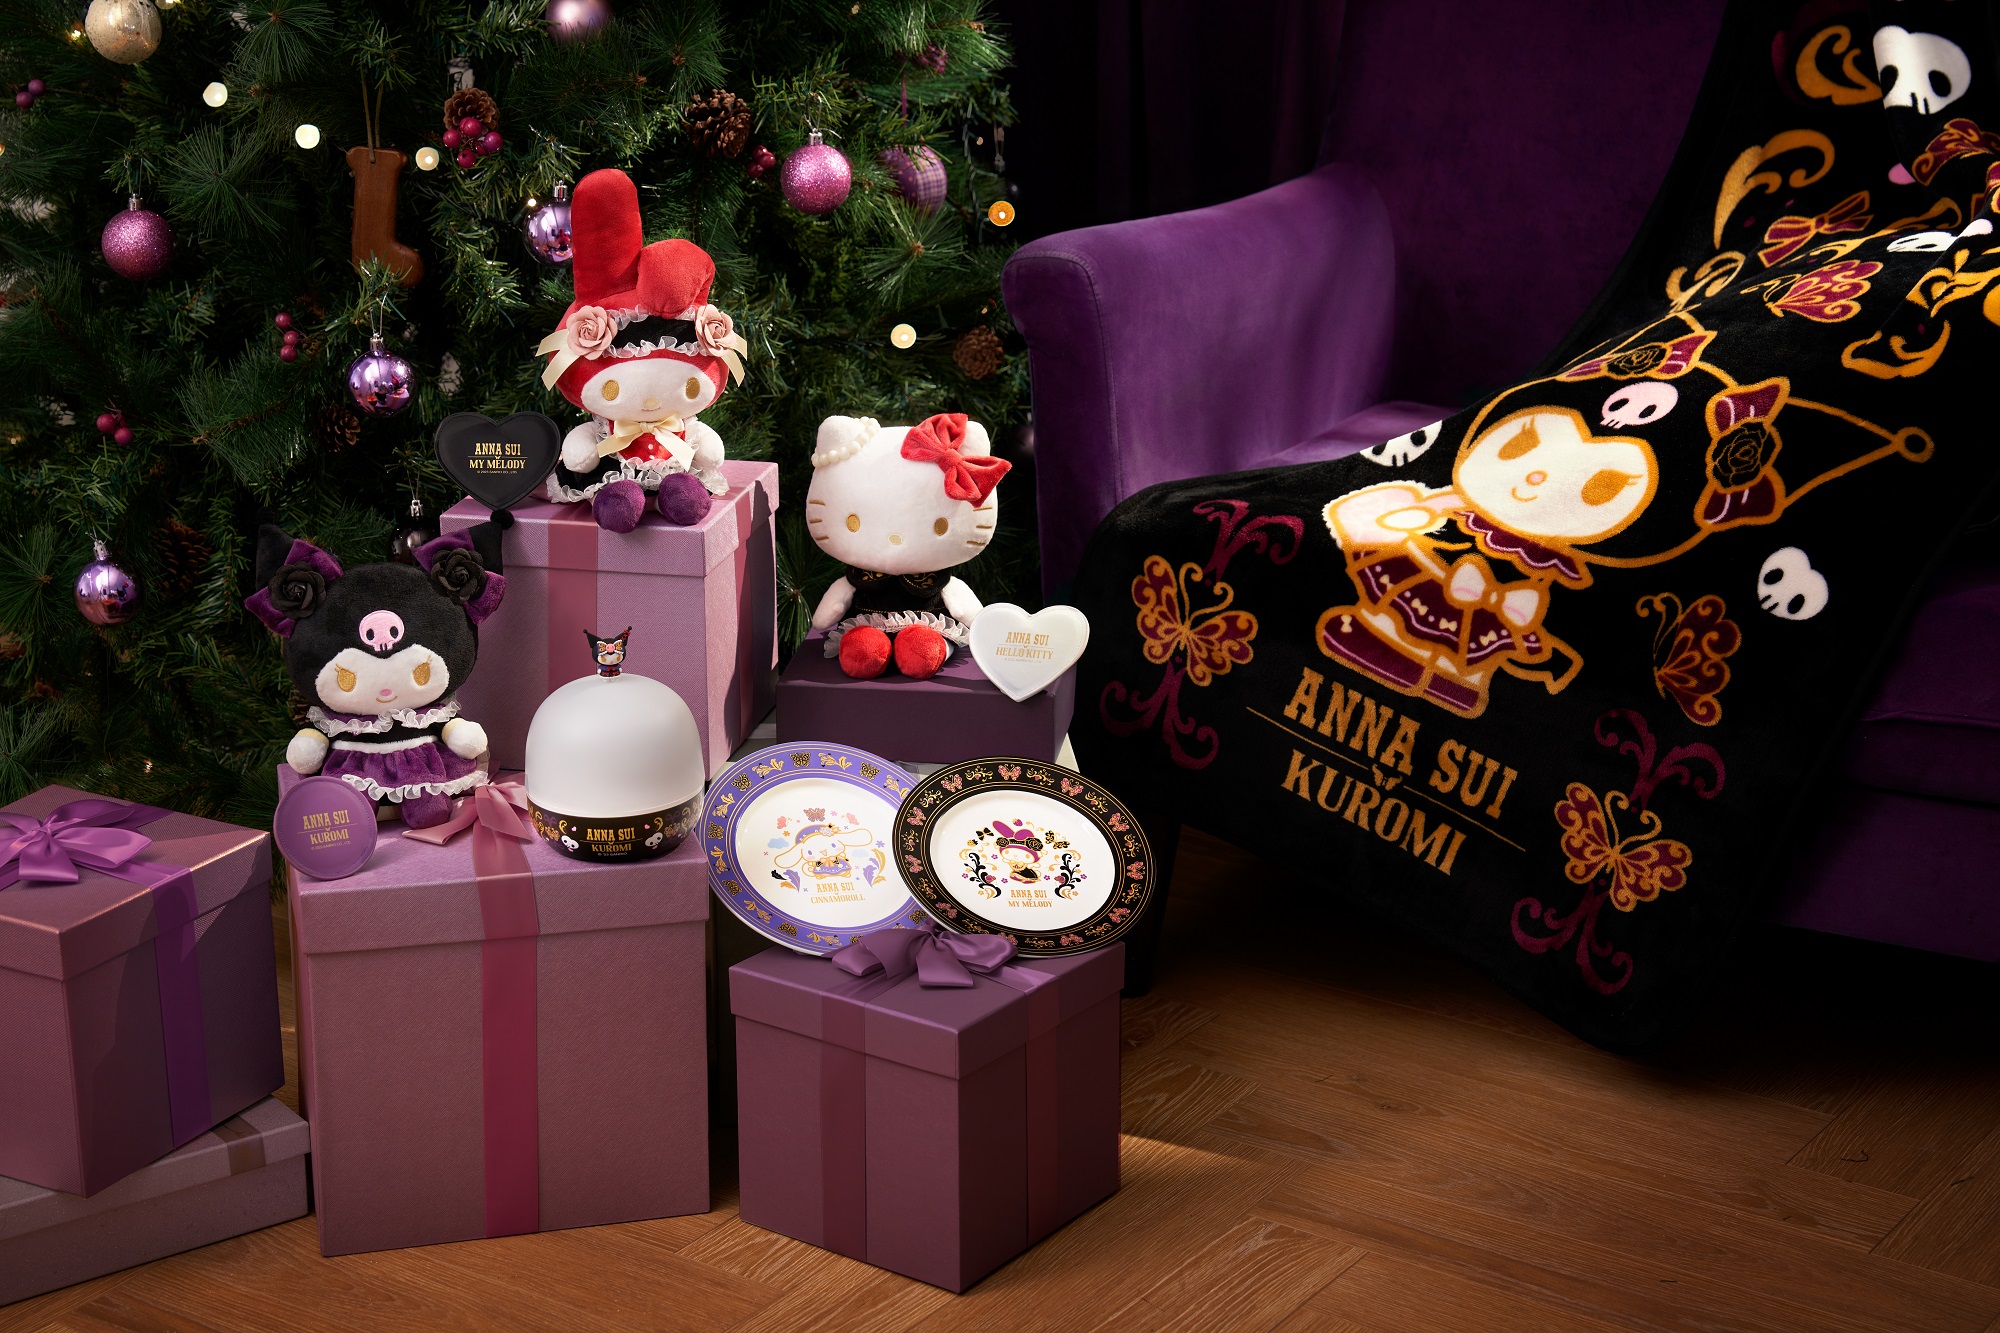 ANNA SUI x Sanrio Hong Kong Unleash More Festive Glam with 3 Limited Edition Plushies with Portable Mirrors Exclusively at 7-Eleven